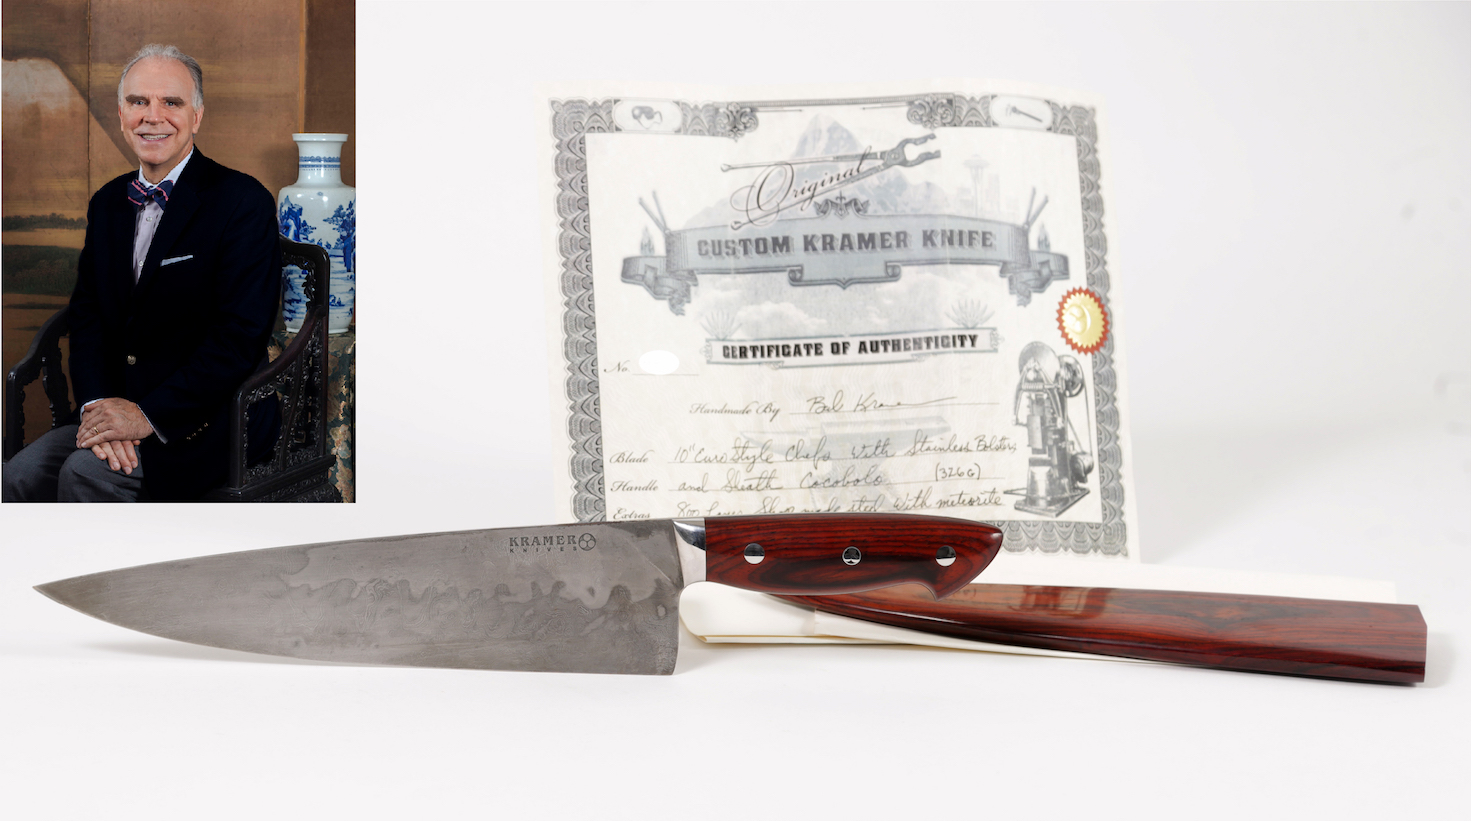 Photo of Anthony Bourdain's Meteorite Chef's Knife and the Custom Kramer certificate of authenticity. Inset of Lark Mason posed in a chair in front of a vase.